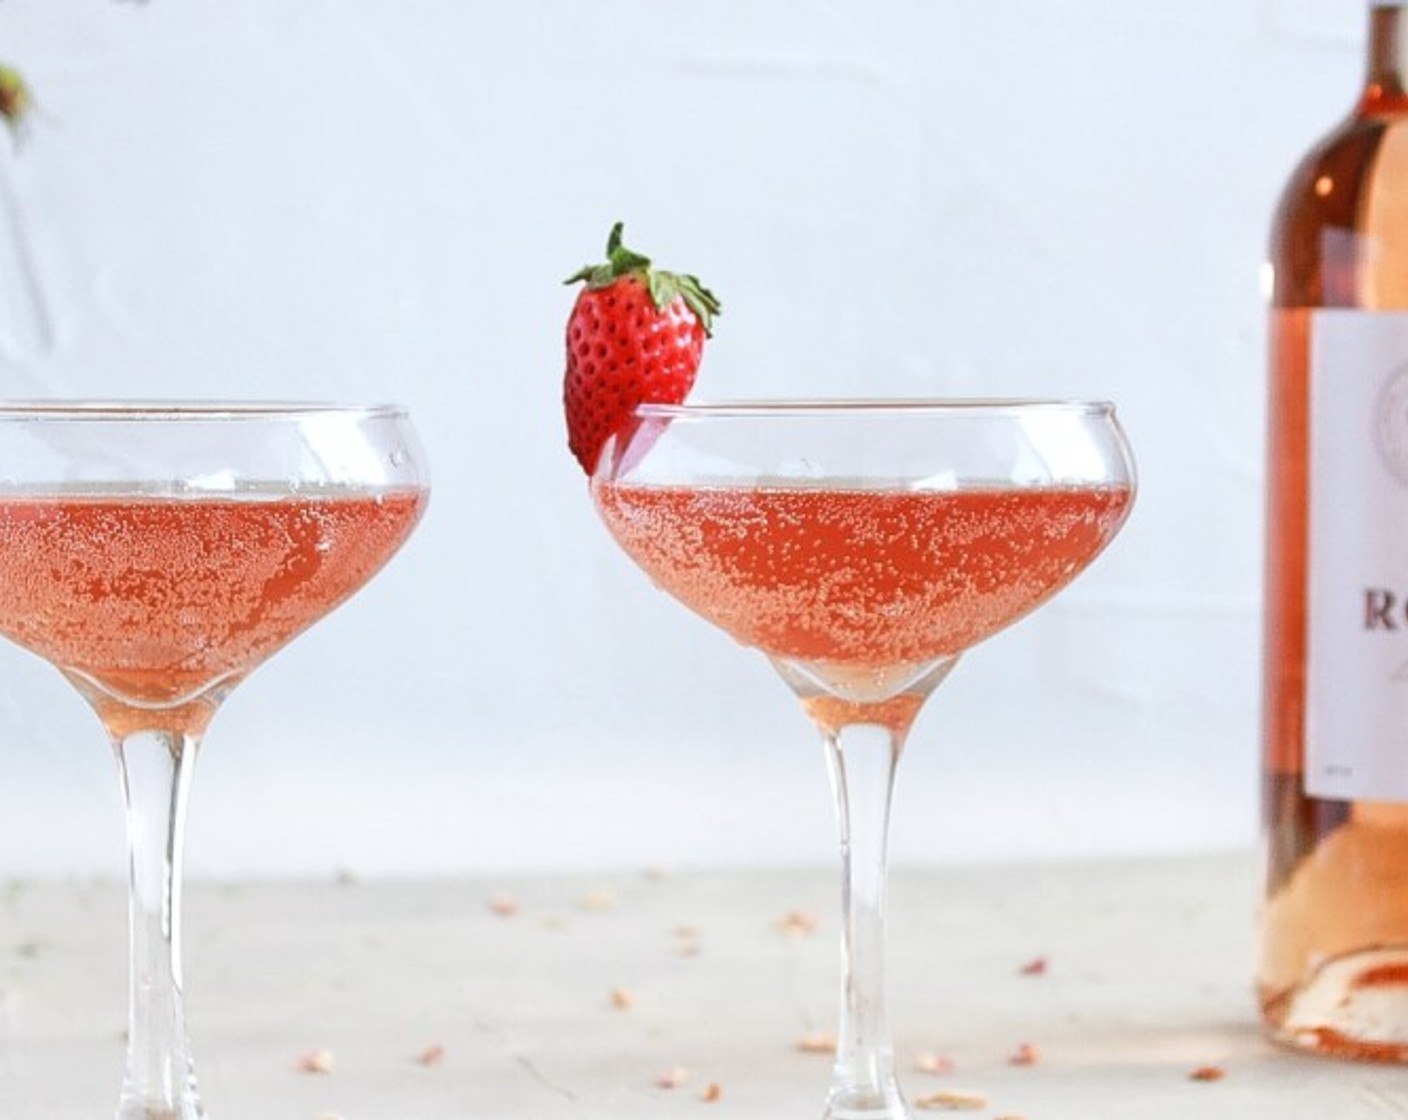 step 4 Place 1.5 oz of Strawberry Rose Simple Syrup, Soda Water (1 fl oz), Rosé Wine (3 fl oz), and Aperol (1 fl oz) into a glass of your choice and stir. Fill to the top with ice and stir again. Garnish with Fresh Strawberry (1).